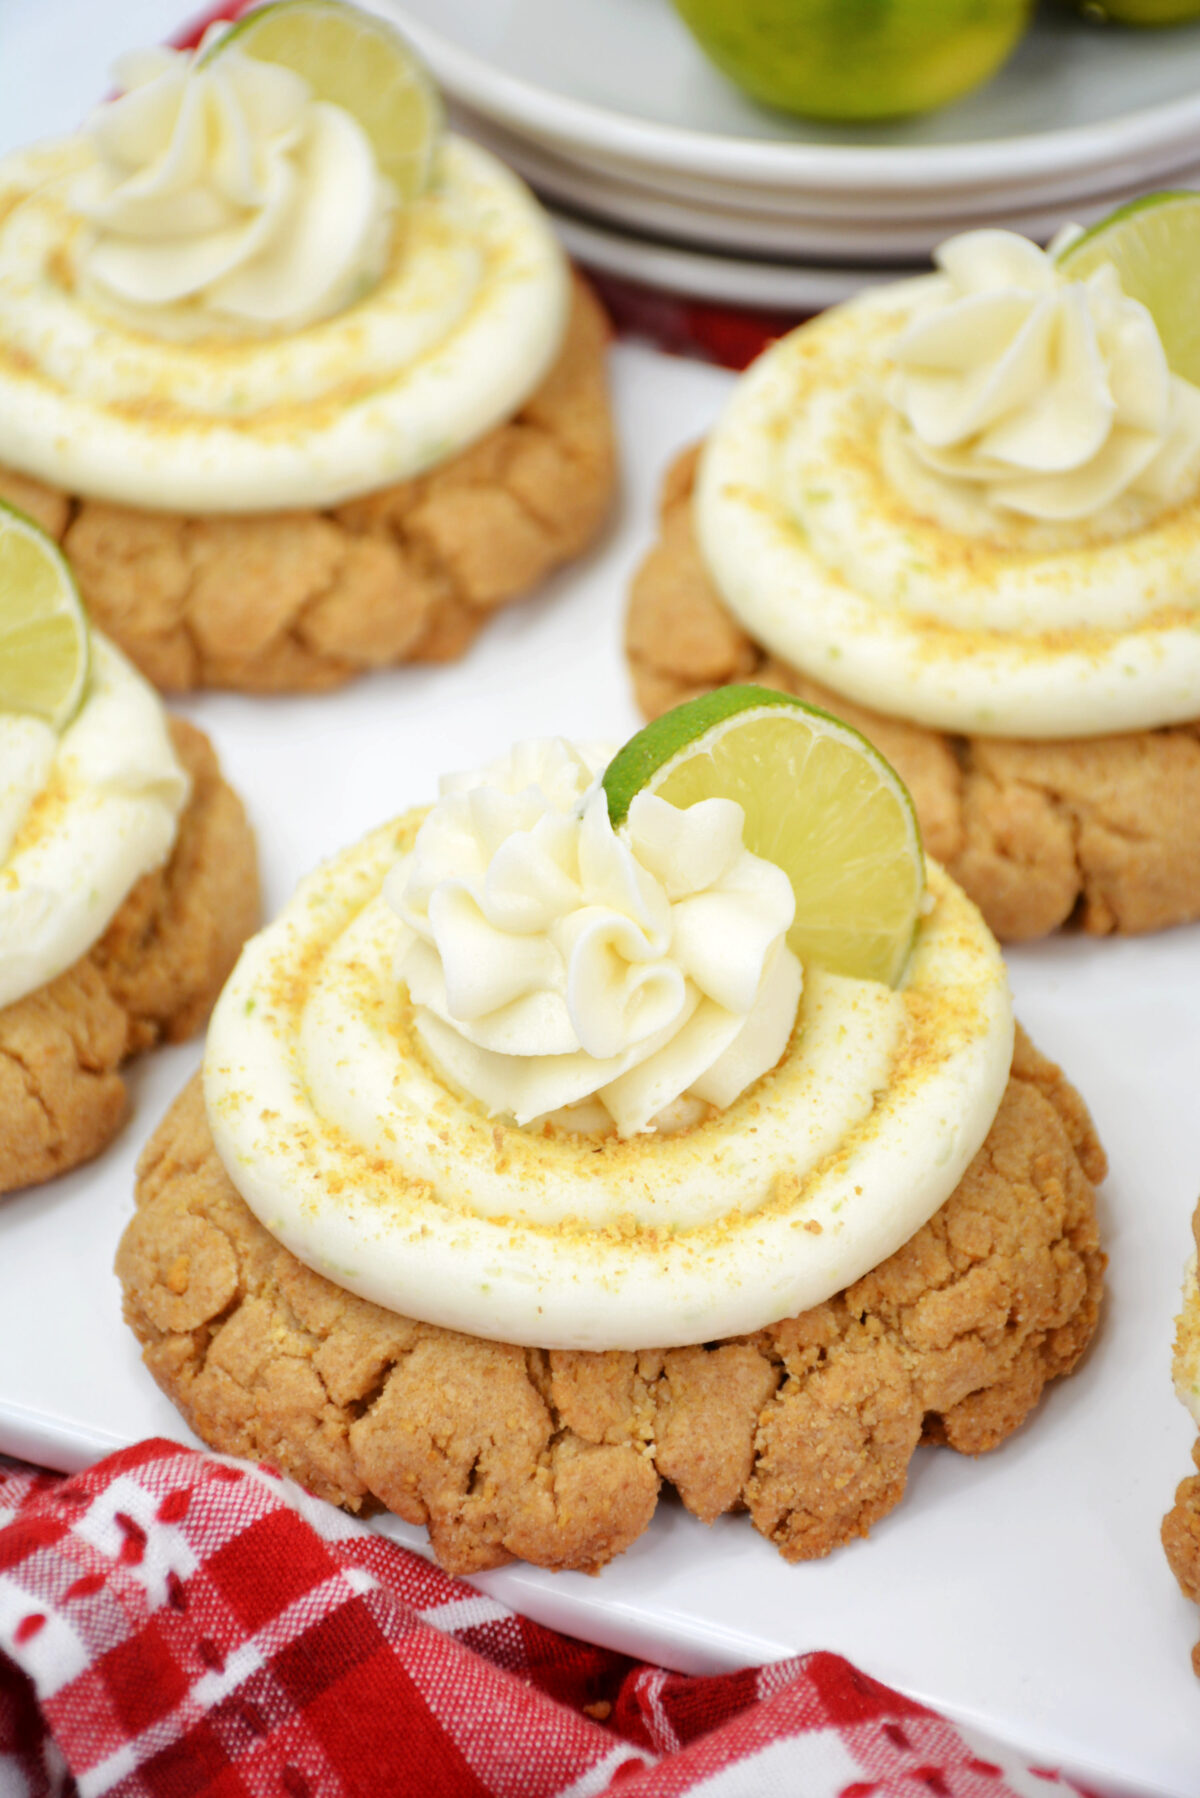 Make your own Crumbl Key Lime Pie Cookies from the comfort of your home with this easy copycat recipe of the beloved cookies